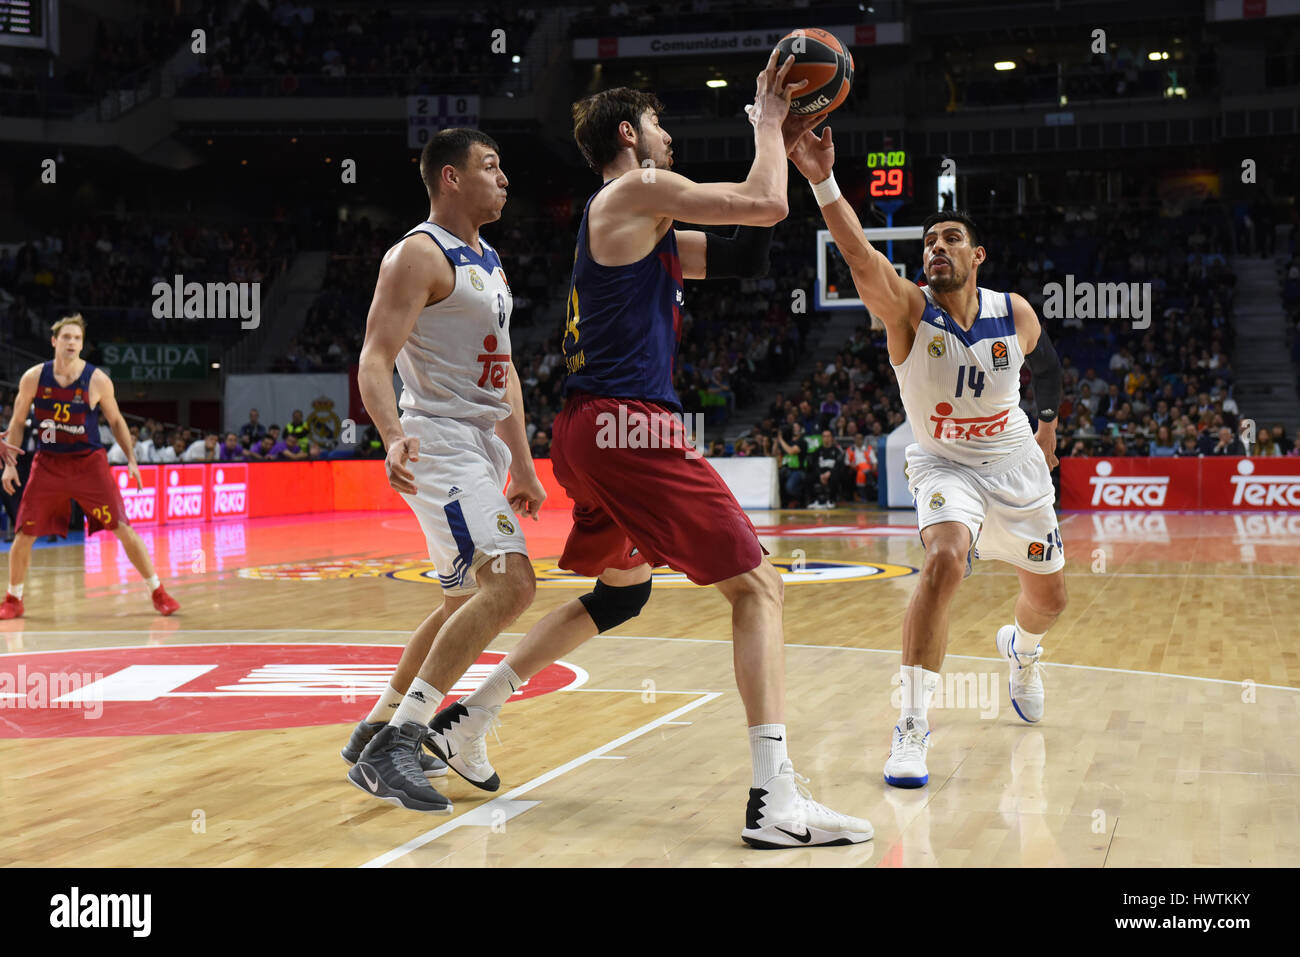 Madrid, Spain. 22nd Mar, 2017. Ante Tomic, center #44 of FC Barcelona Lassa in action with Gustavo Ayón, right, #14 of Real Madrid, and Jonas Maciulis #8 of Real Madrid, during the Euroleague basketball match between Real Madrid and FC Barcelona Lassa in WiZink center in Madrid. Credit: Jorge Sanz/Pacific Press/Alamy Live News Stock Photo